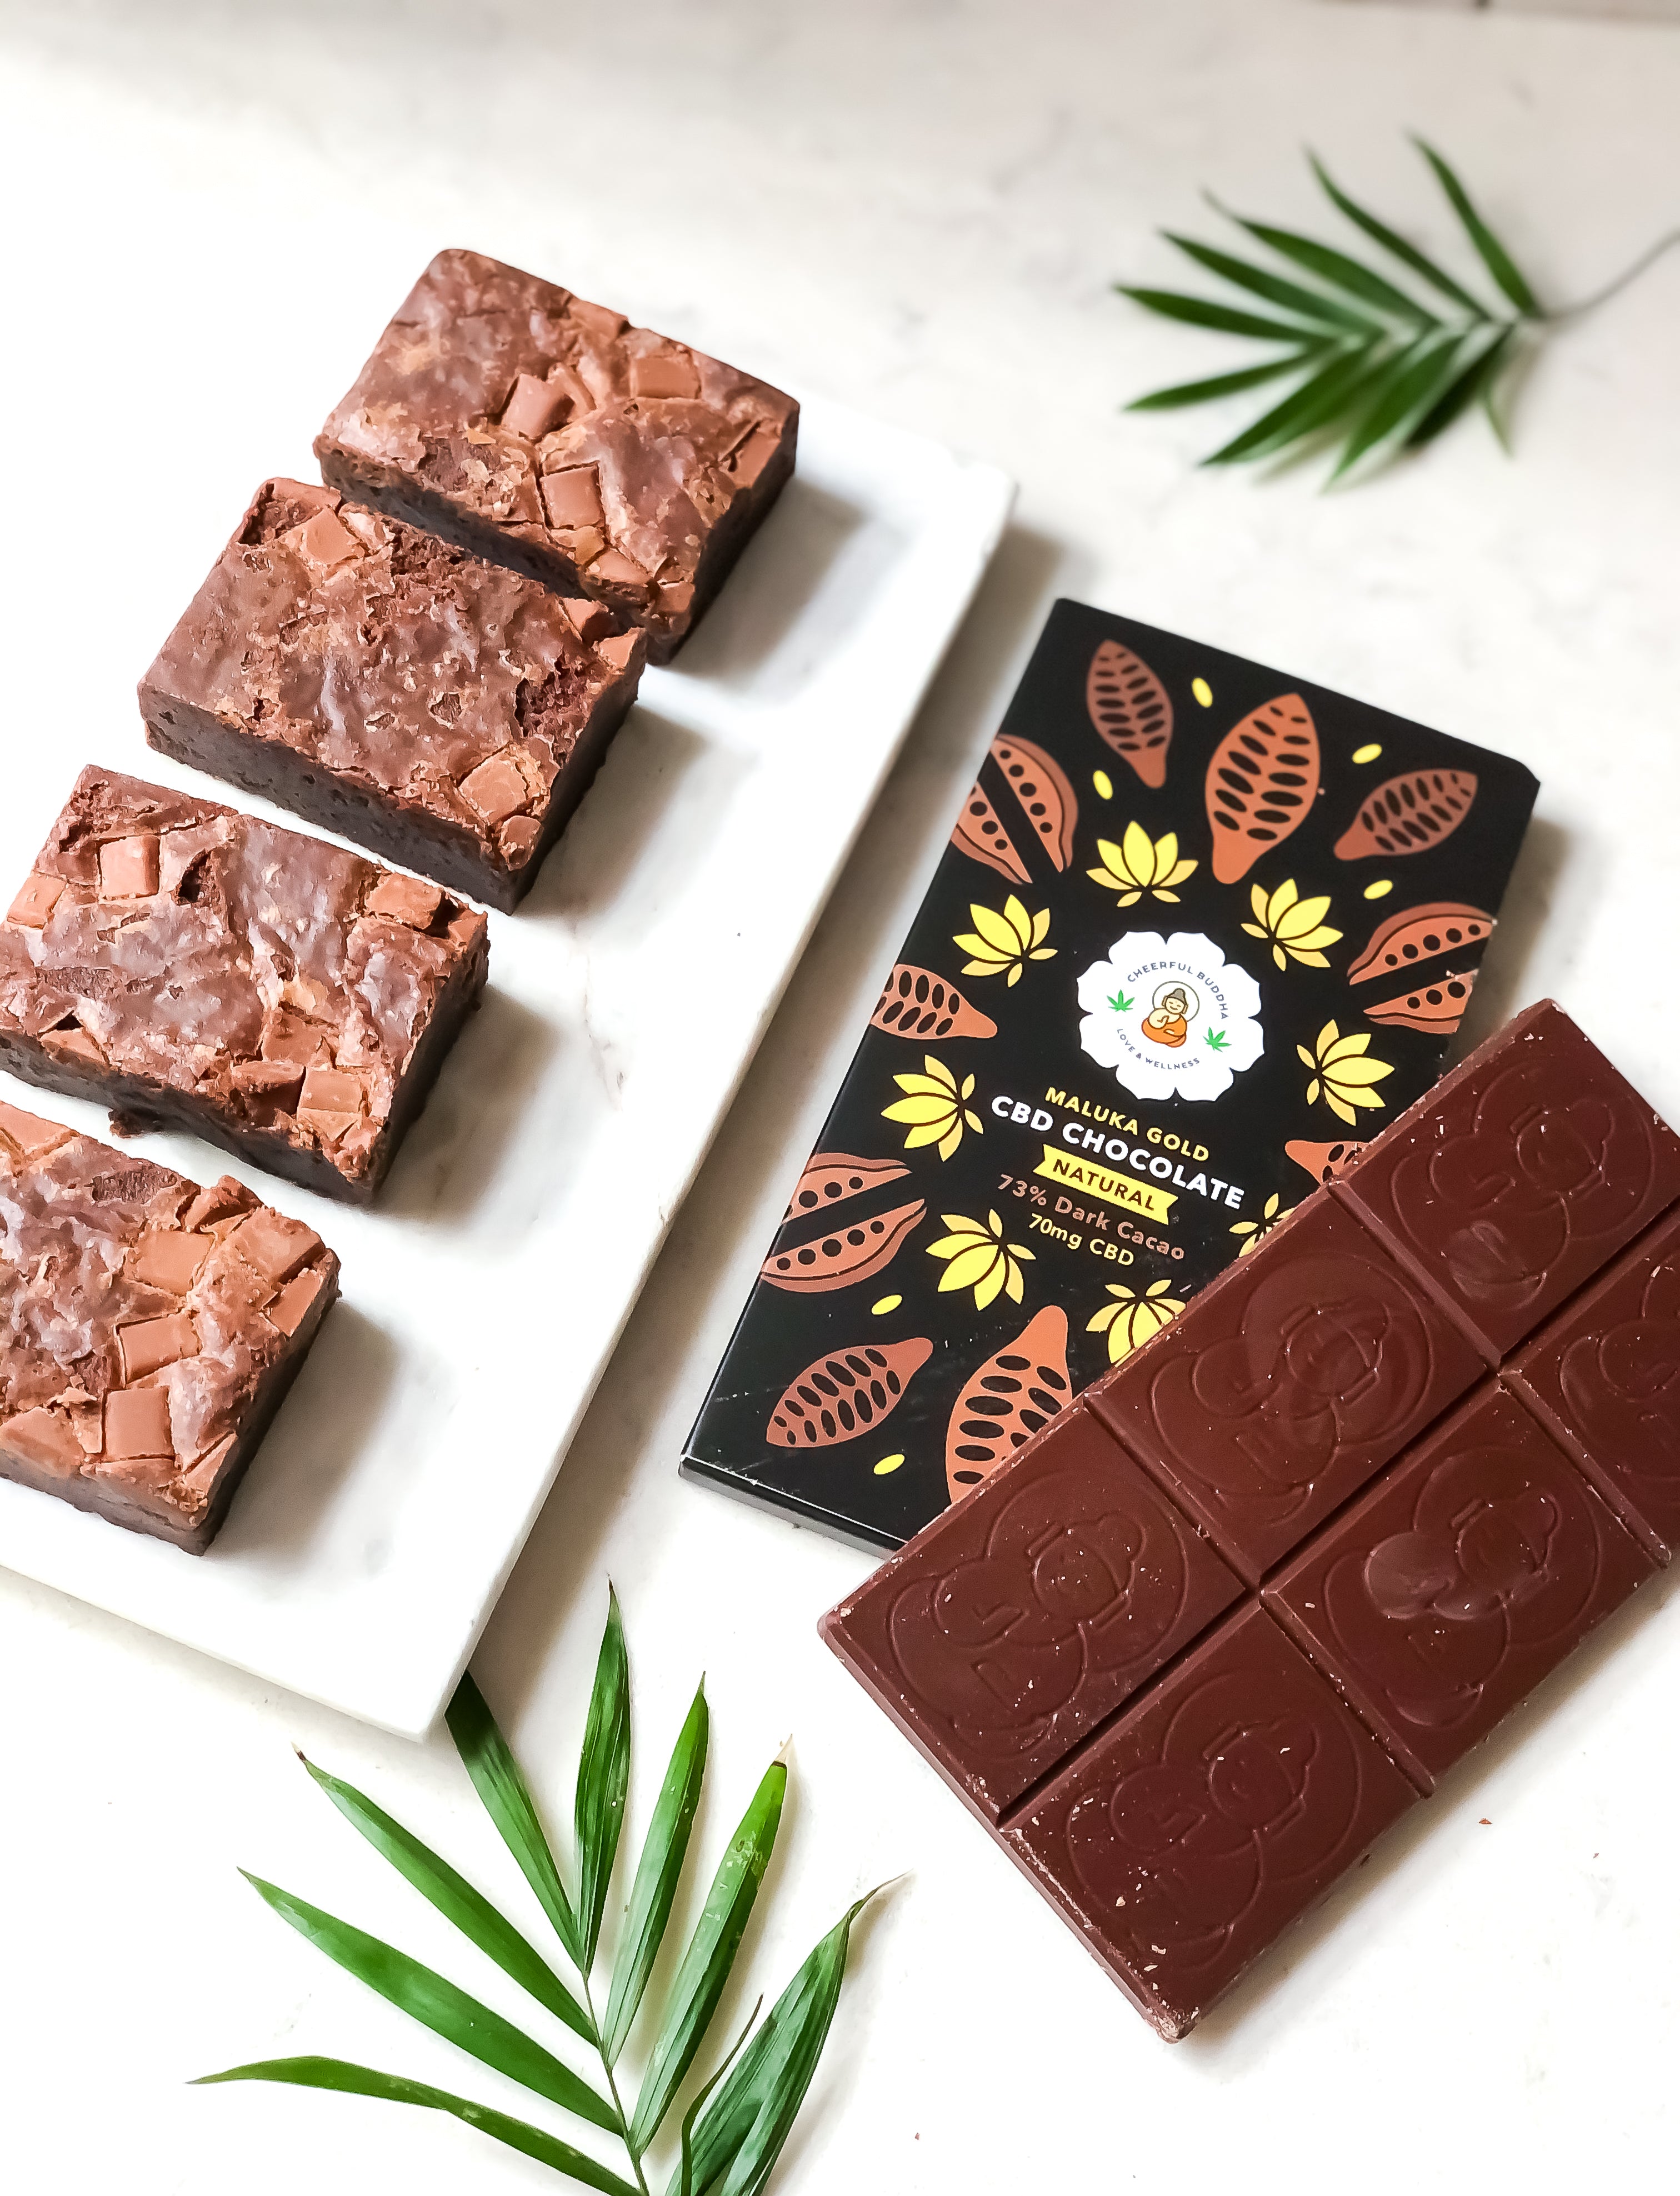 CBD Chocolate: is it really that great?